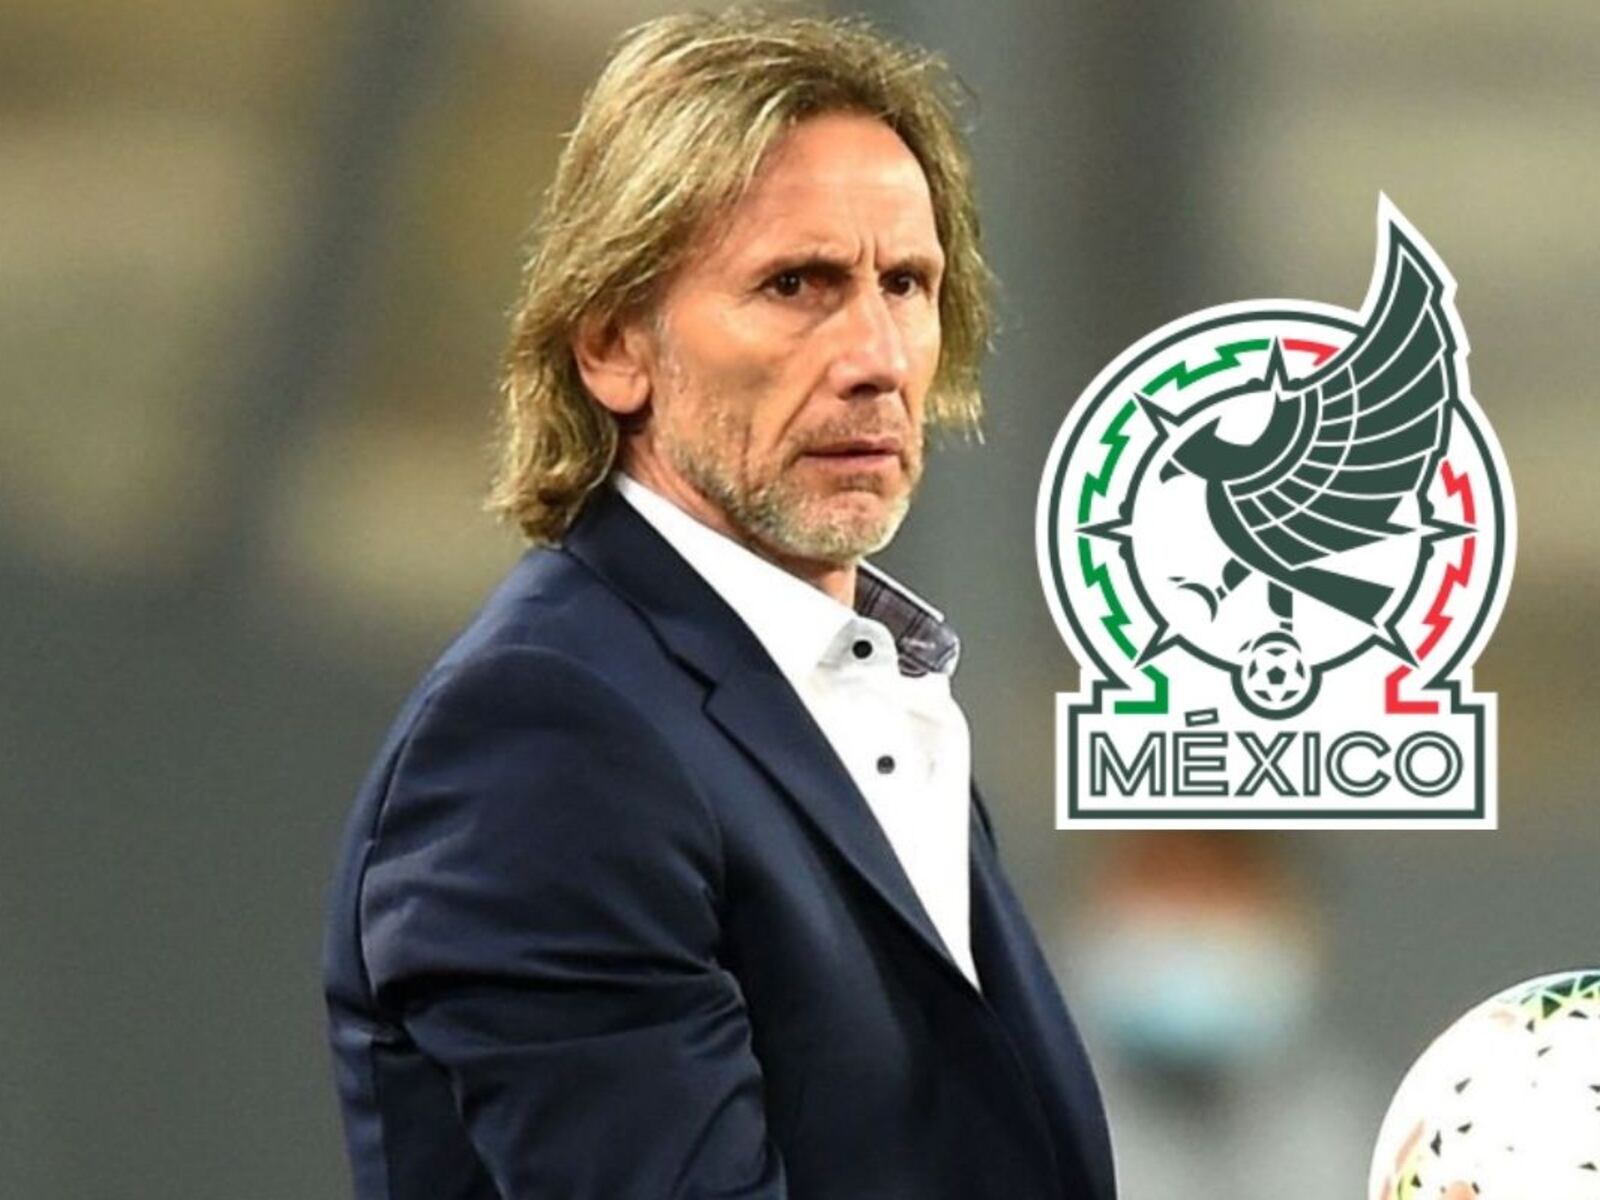 The difference between the salary Ricardo Gareca and Herrera would ask for to get to El Tri